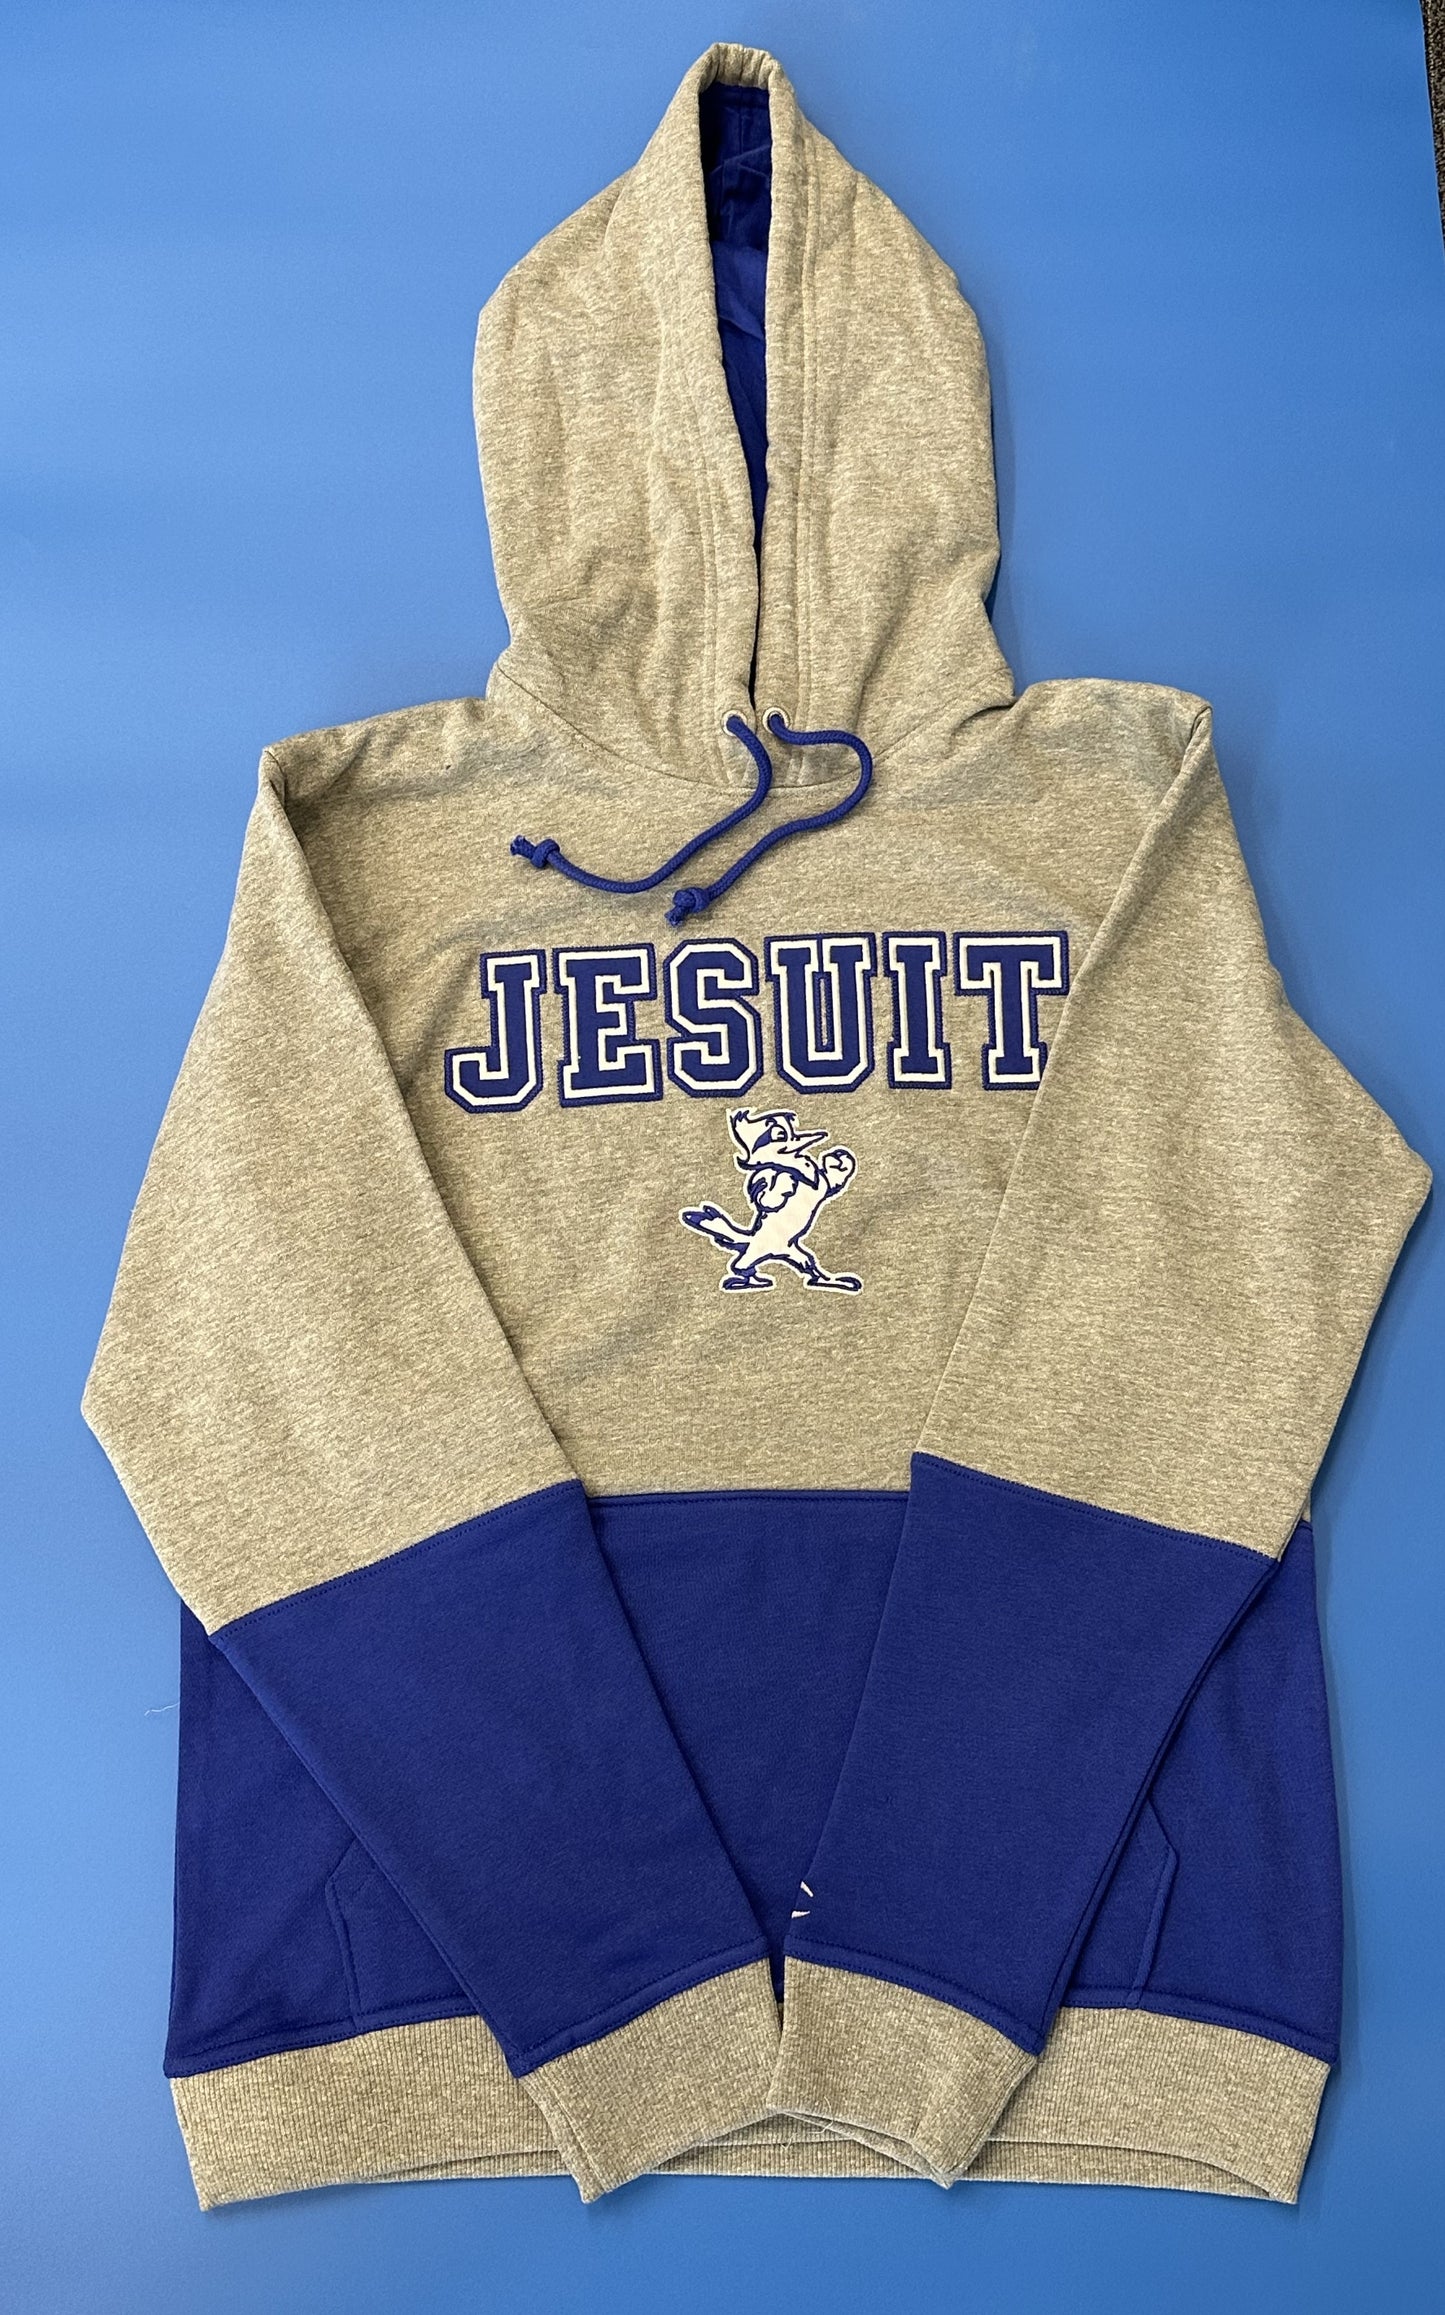 Champion.  70% Cotton/30% Polyester.  Tackle Twill applique - Jesuit with Jayson